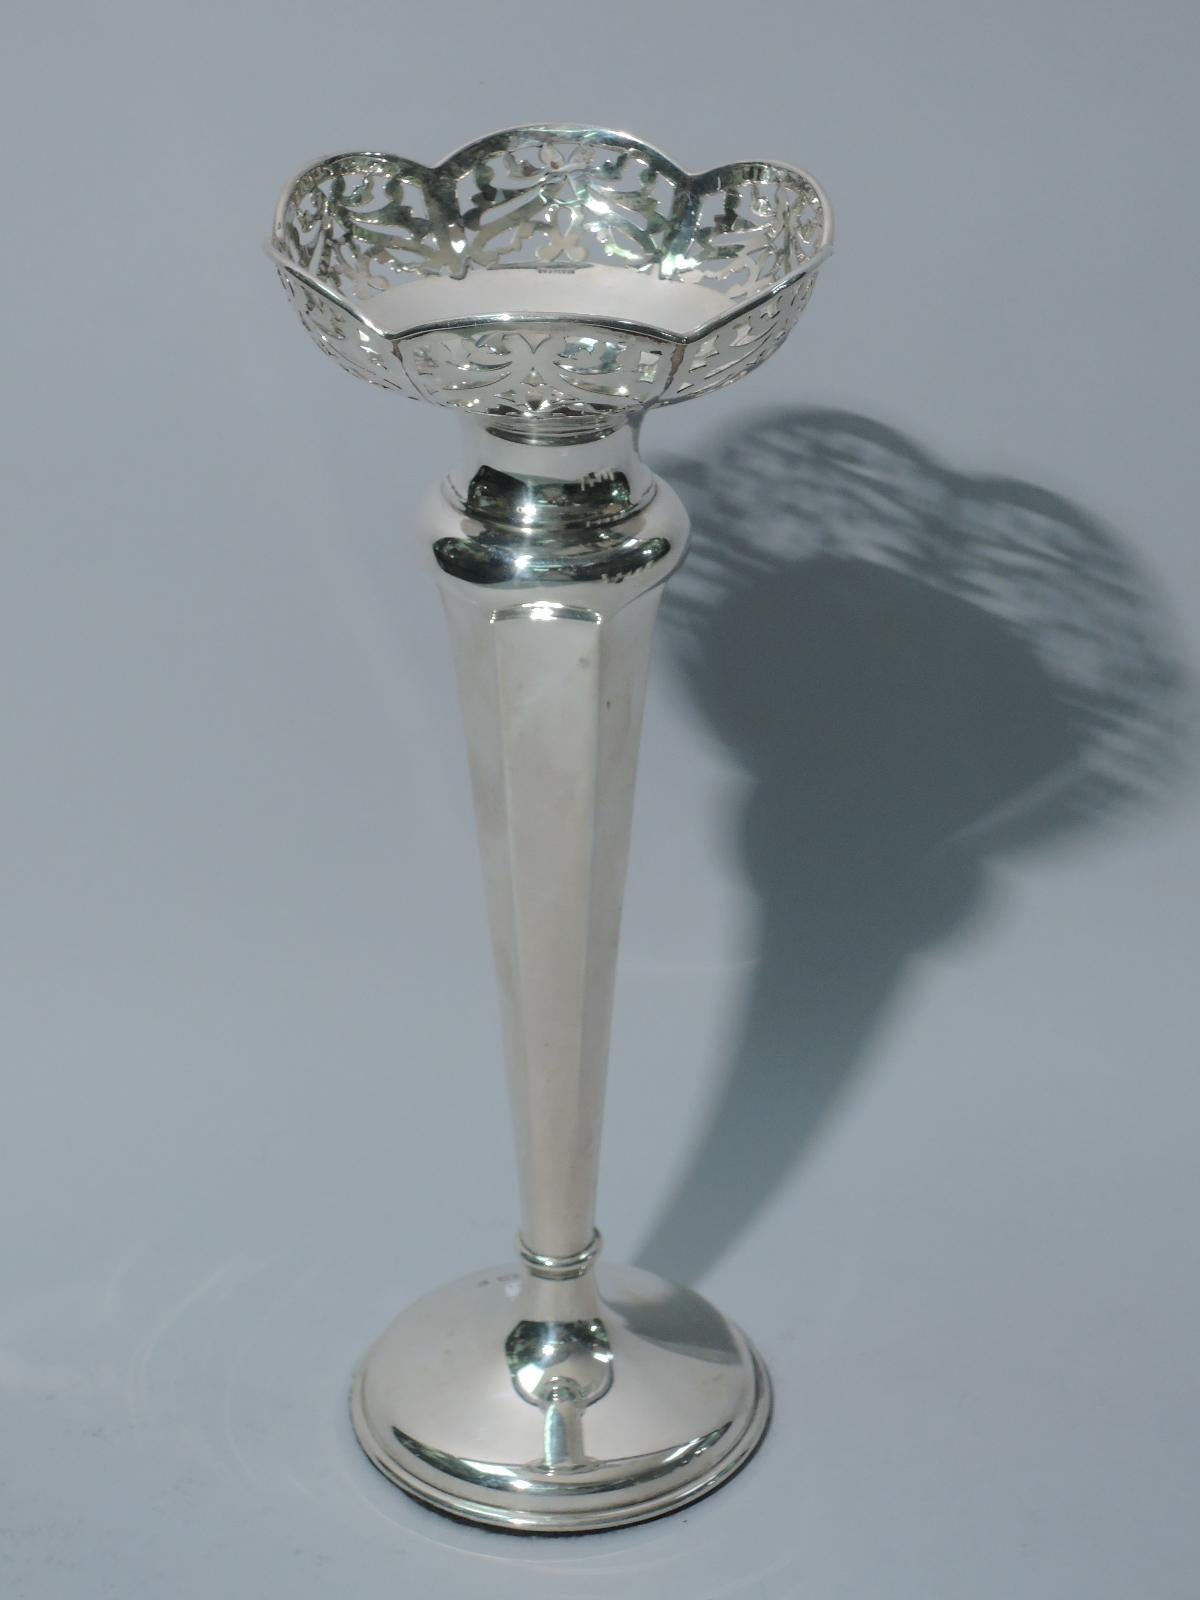 George V sterling silver vase. Made by Alexander Clark in Birmingham in 1923. Straight and faceted sides, small knop, and raised foot. Molded and scalloped rim with curved and pierced sides. Weighted. Fully marked. Weighted.